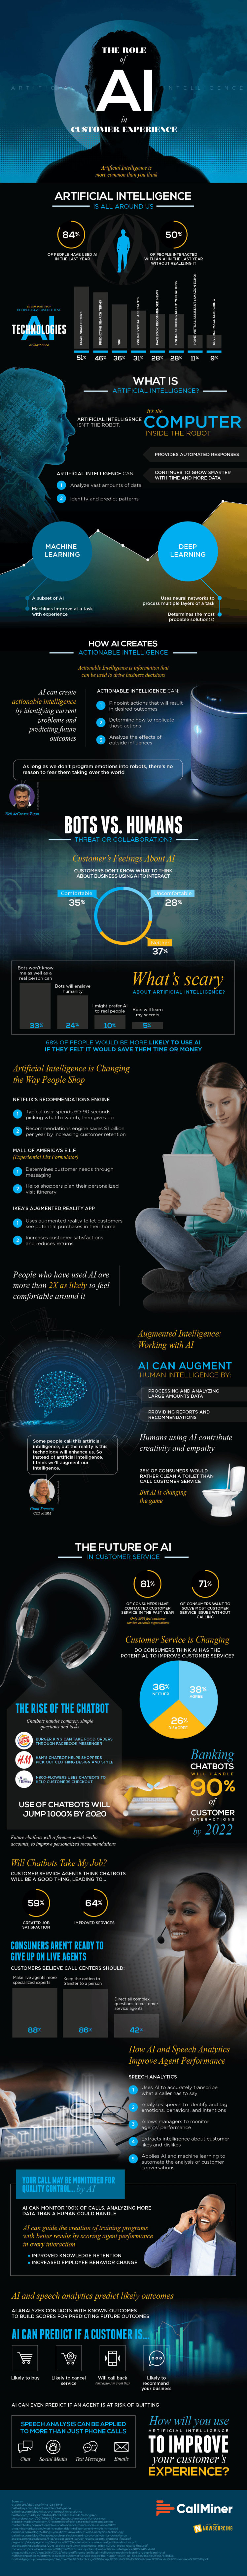 AI Customer Experience infographic